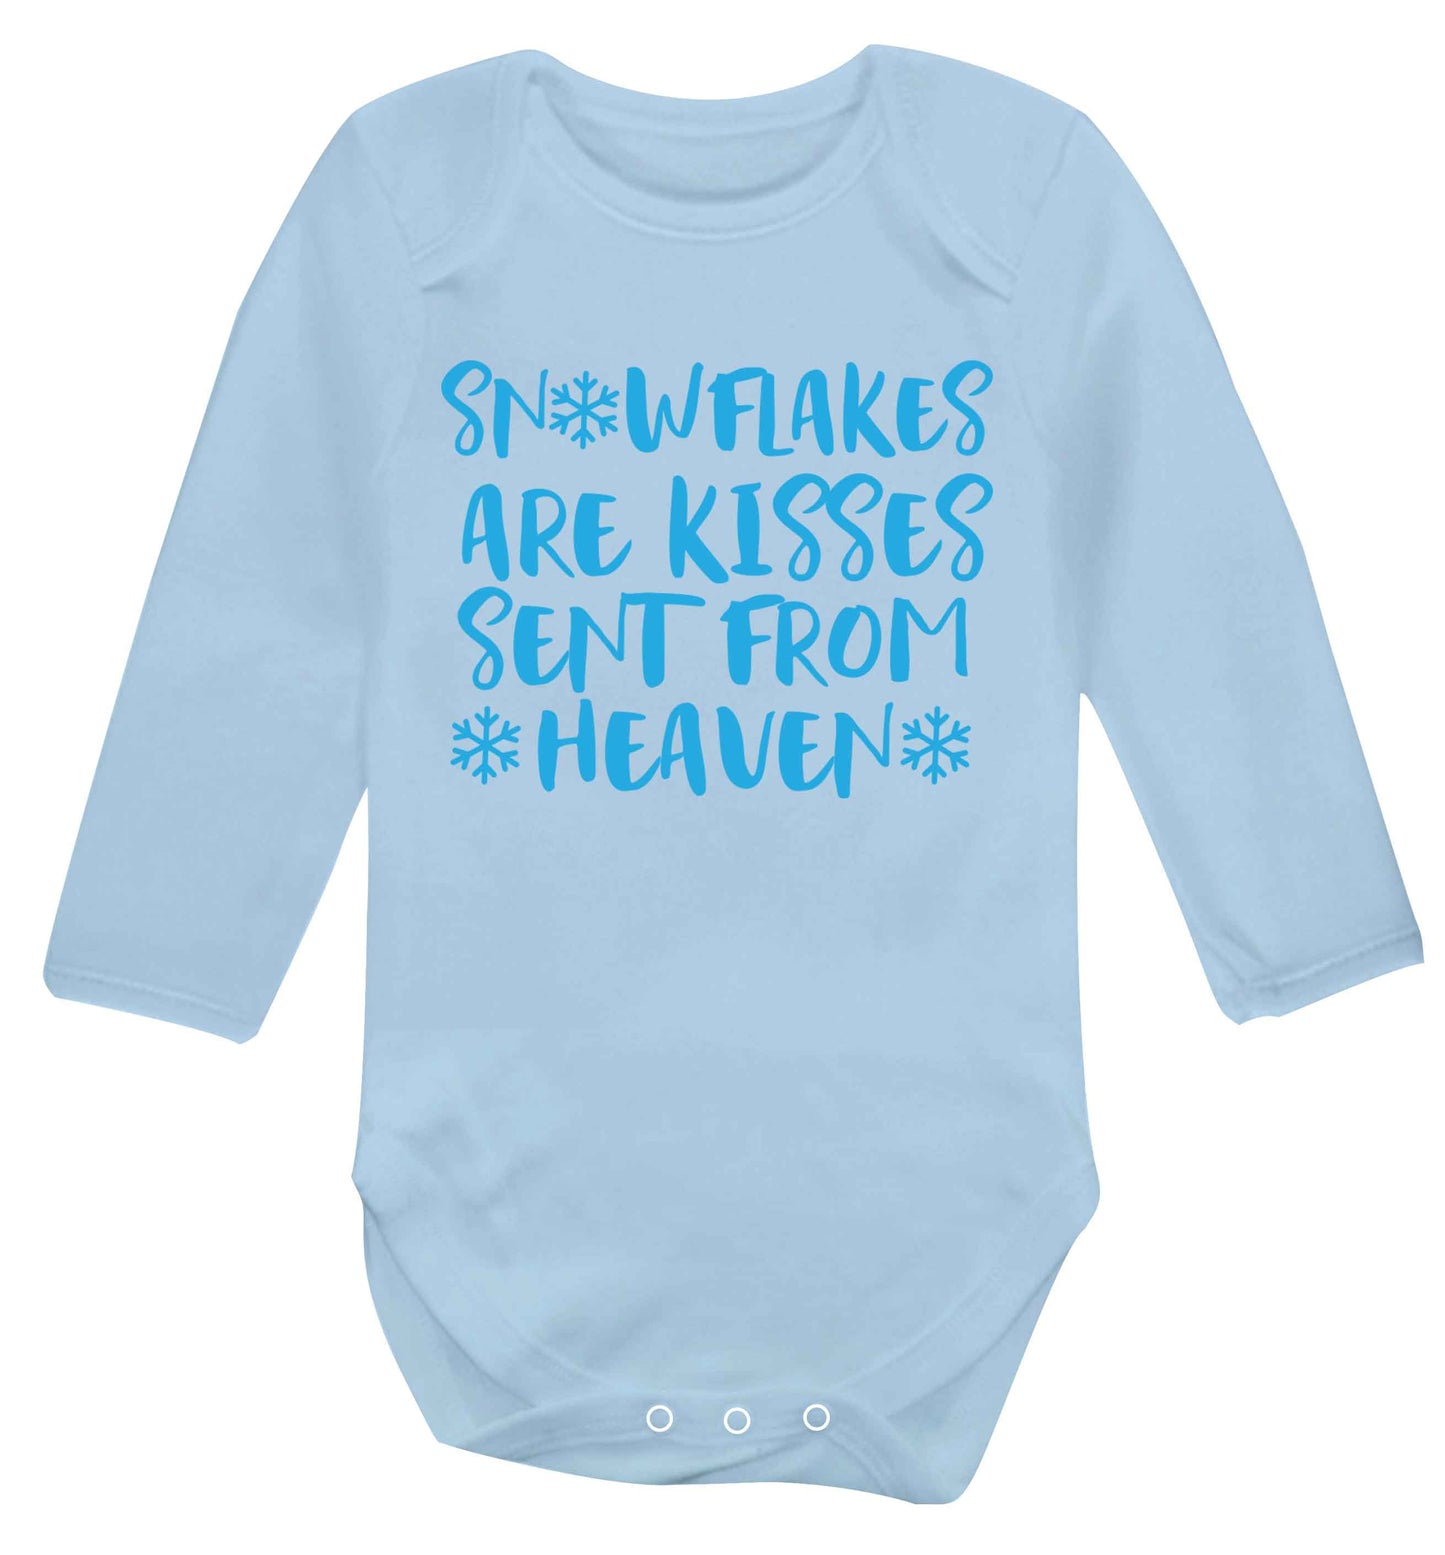 Snowflakes are kisses sent from heaven Baby Vest long sleeved pale blue 6-12 months